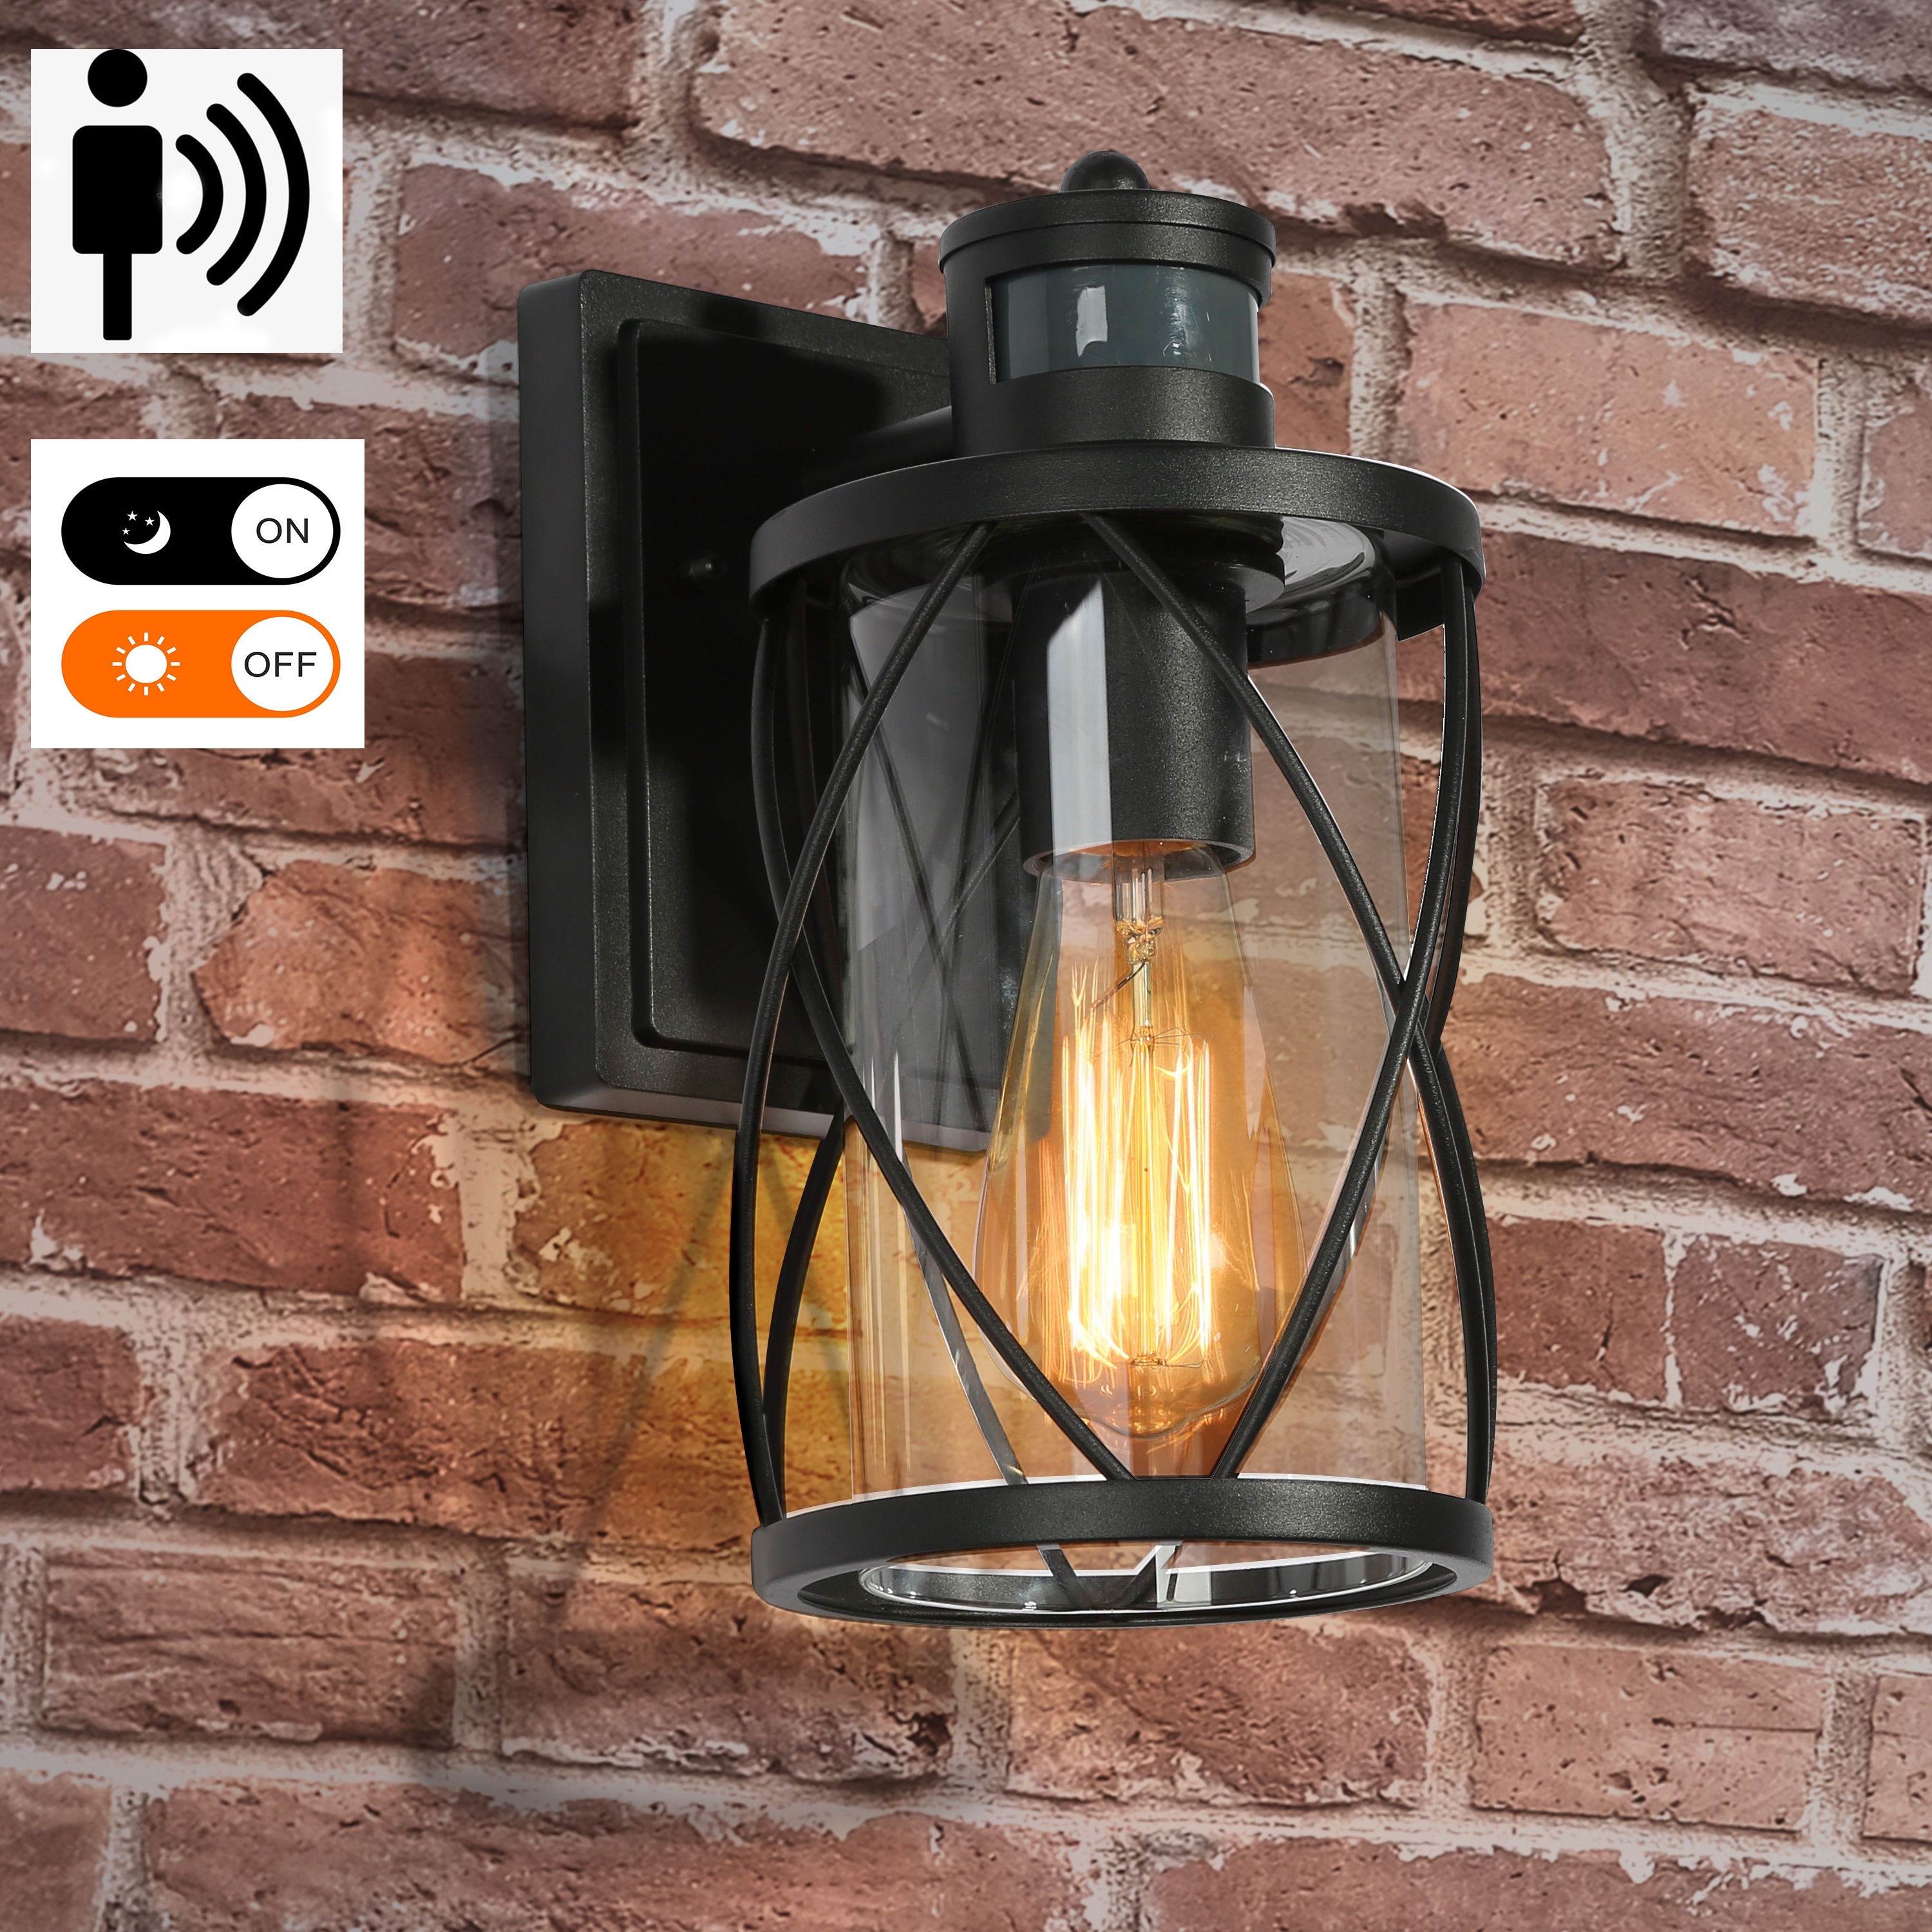 Waterproof Motion Sensor Outdoor Wall Lantern Lights Non-Solar Wall Cage  Lamp for Garage Porch Front Door Bed Bath  Beyond 35561314